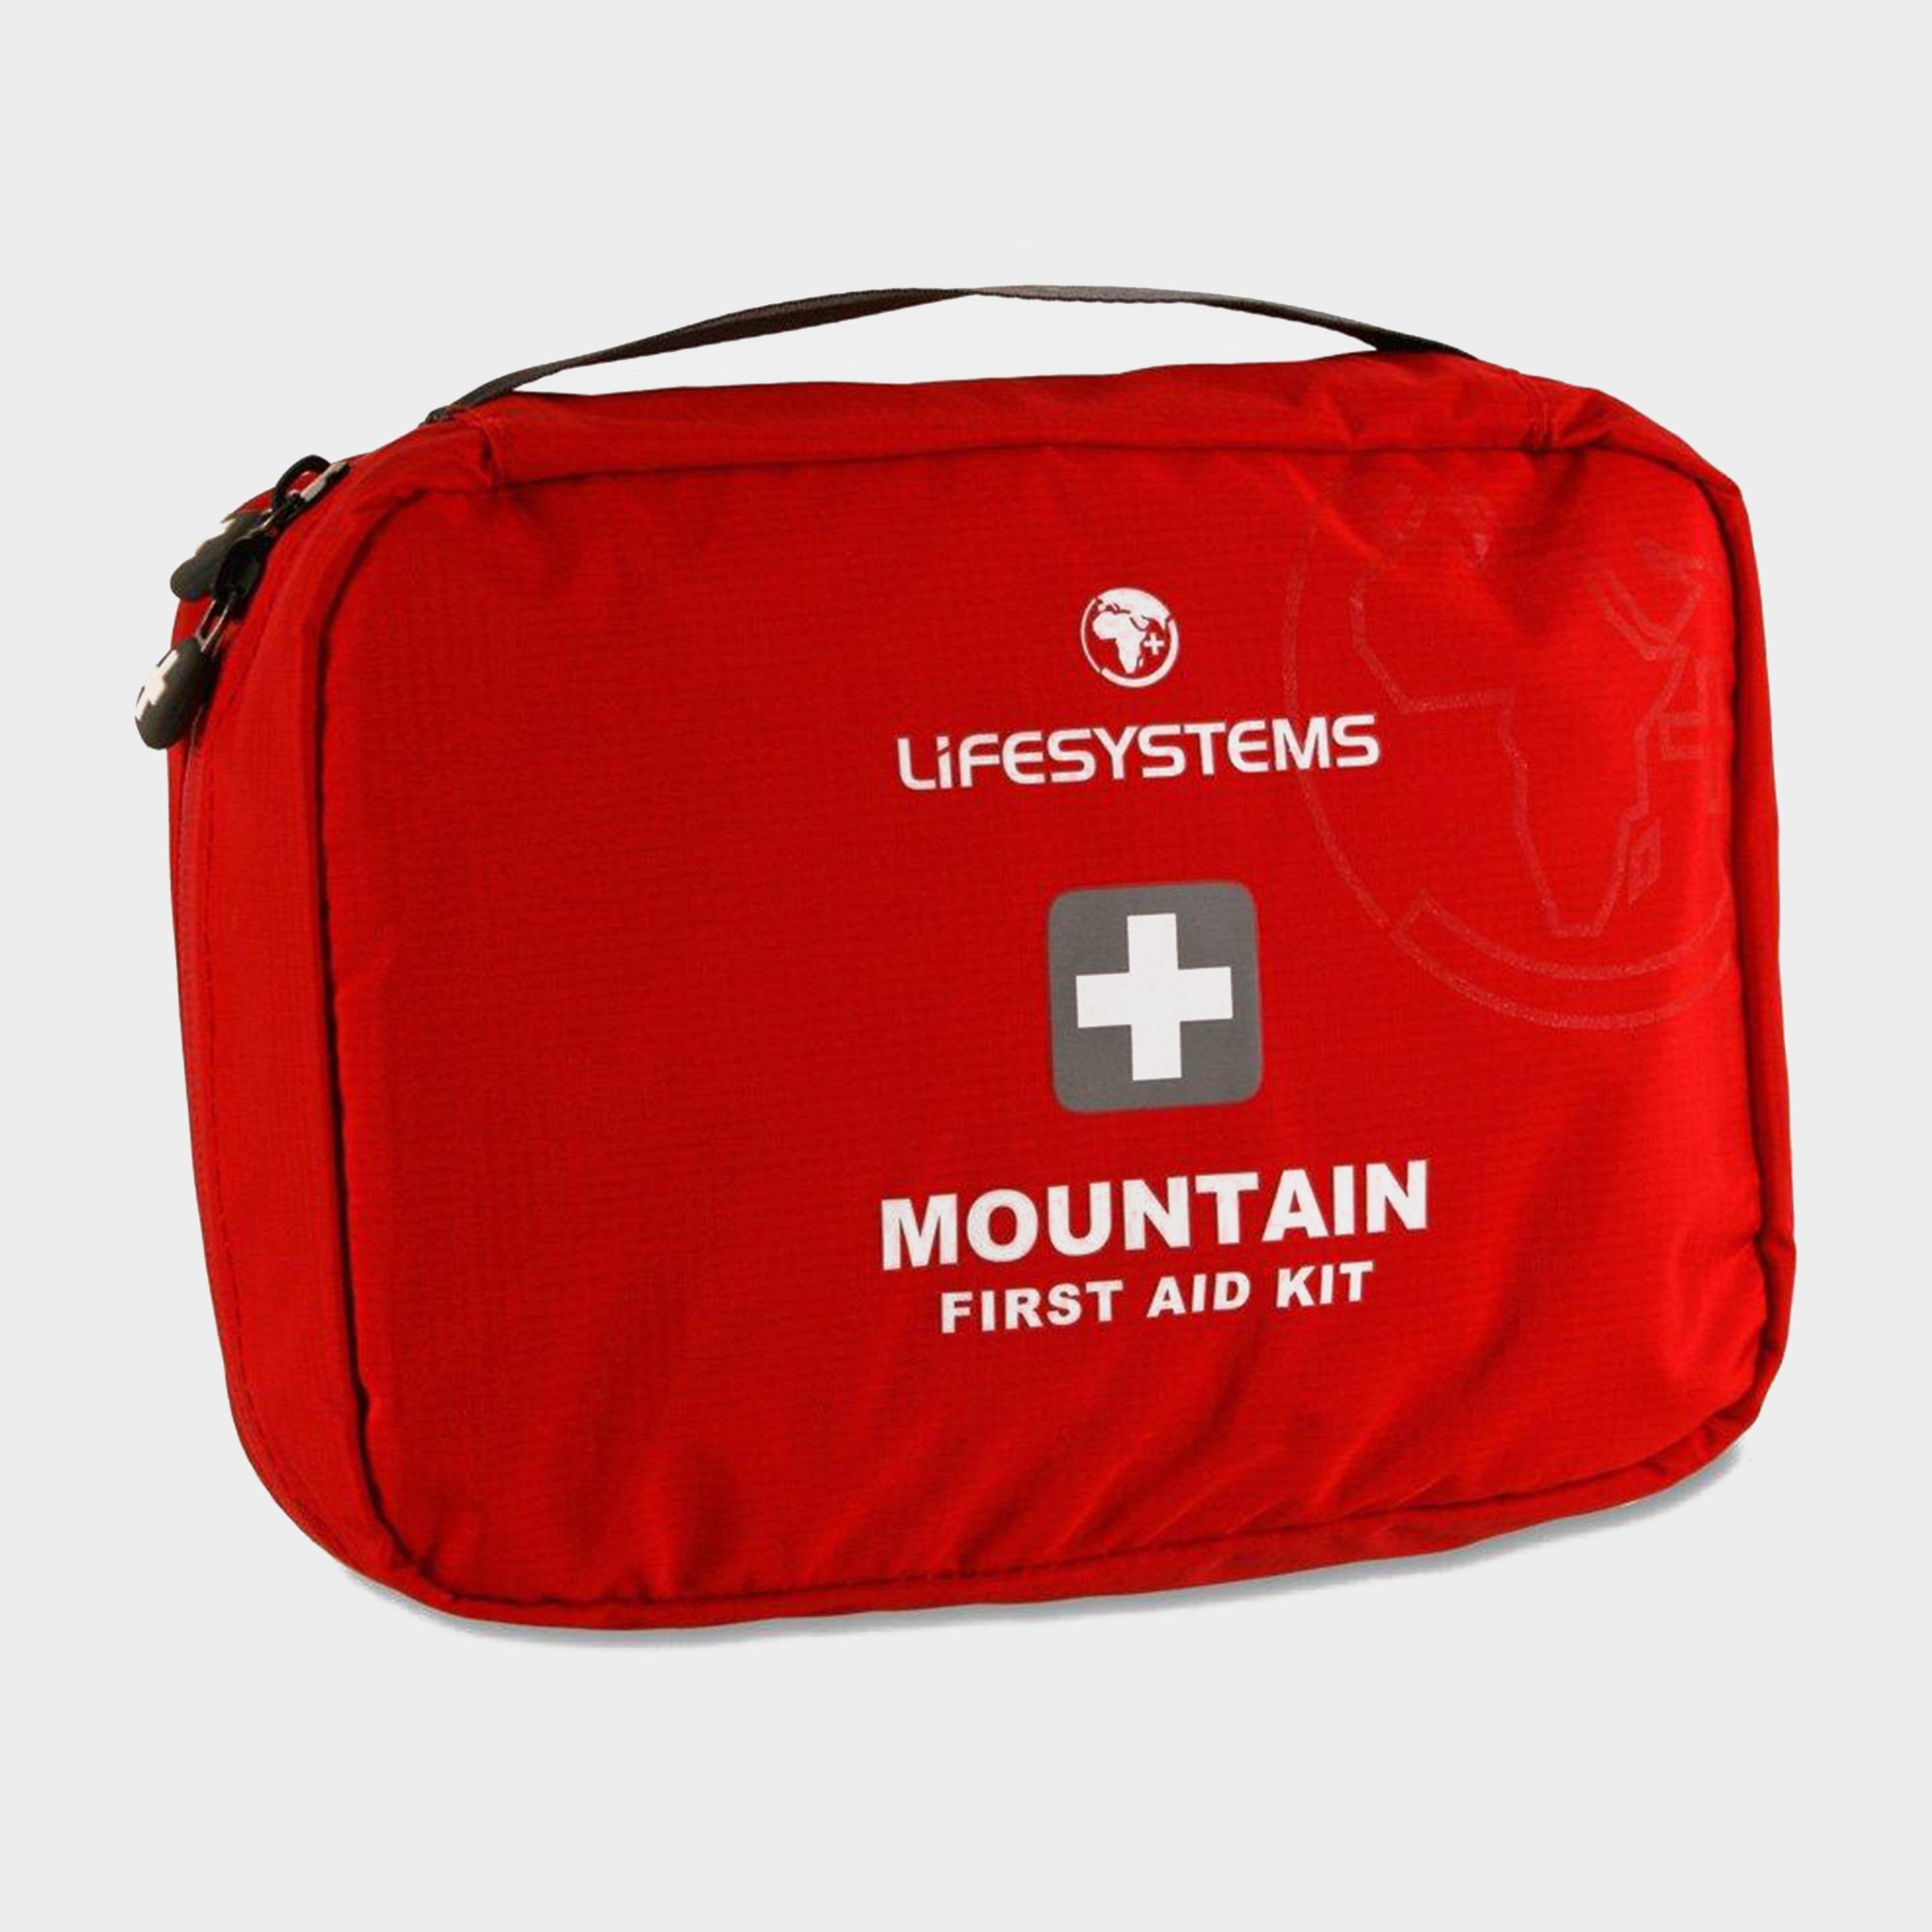 Lifesystems Mountain First Aid Kit  Red